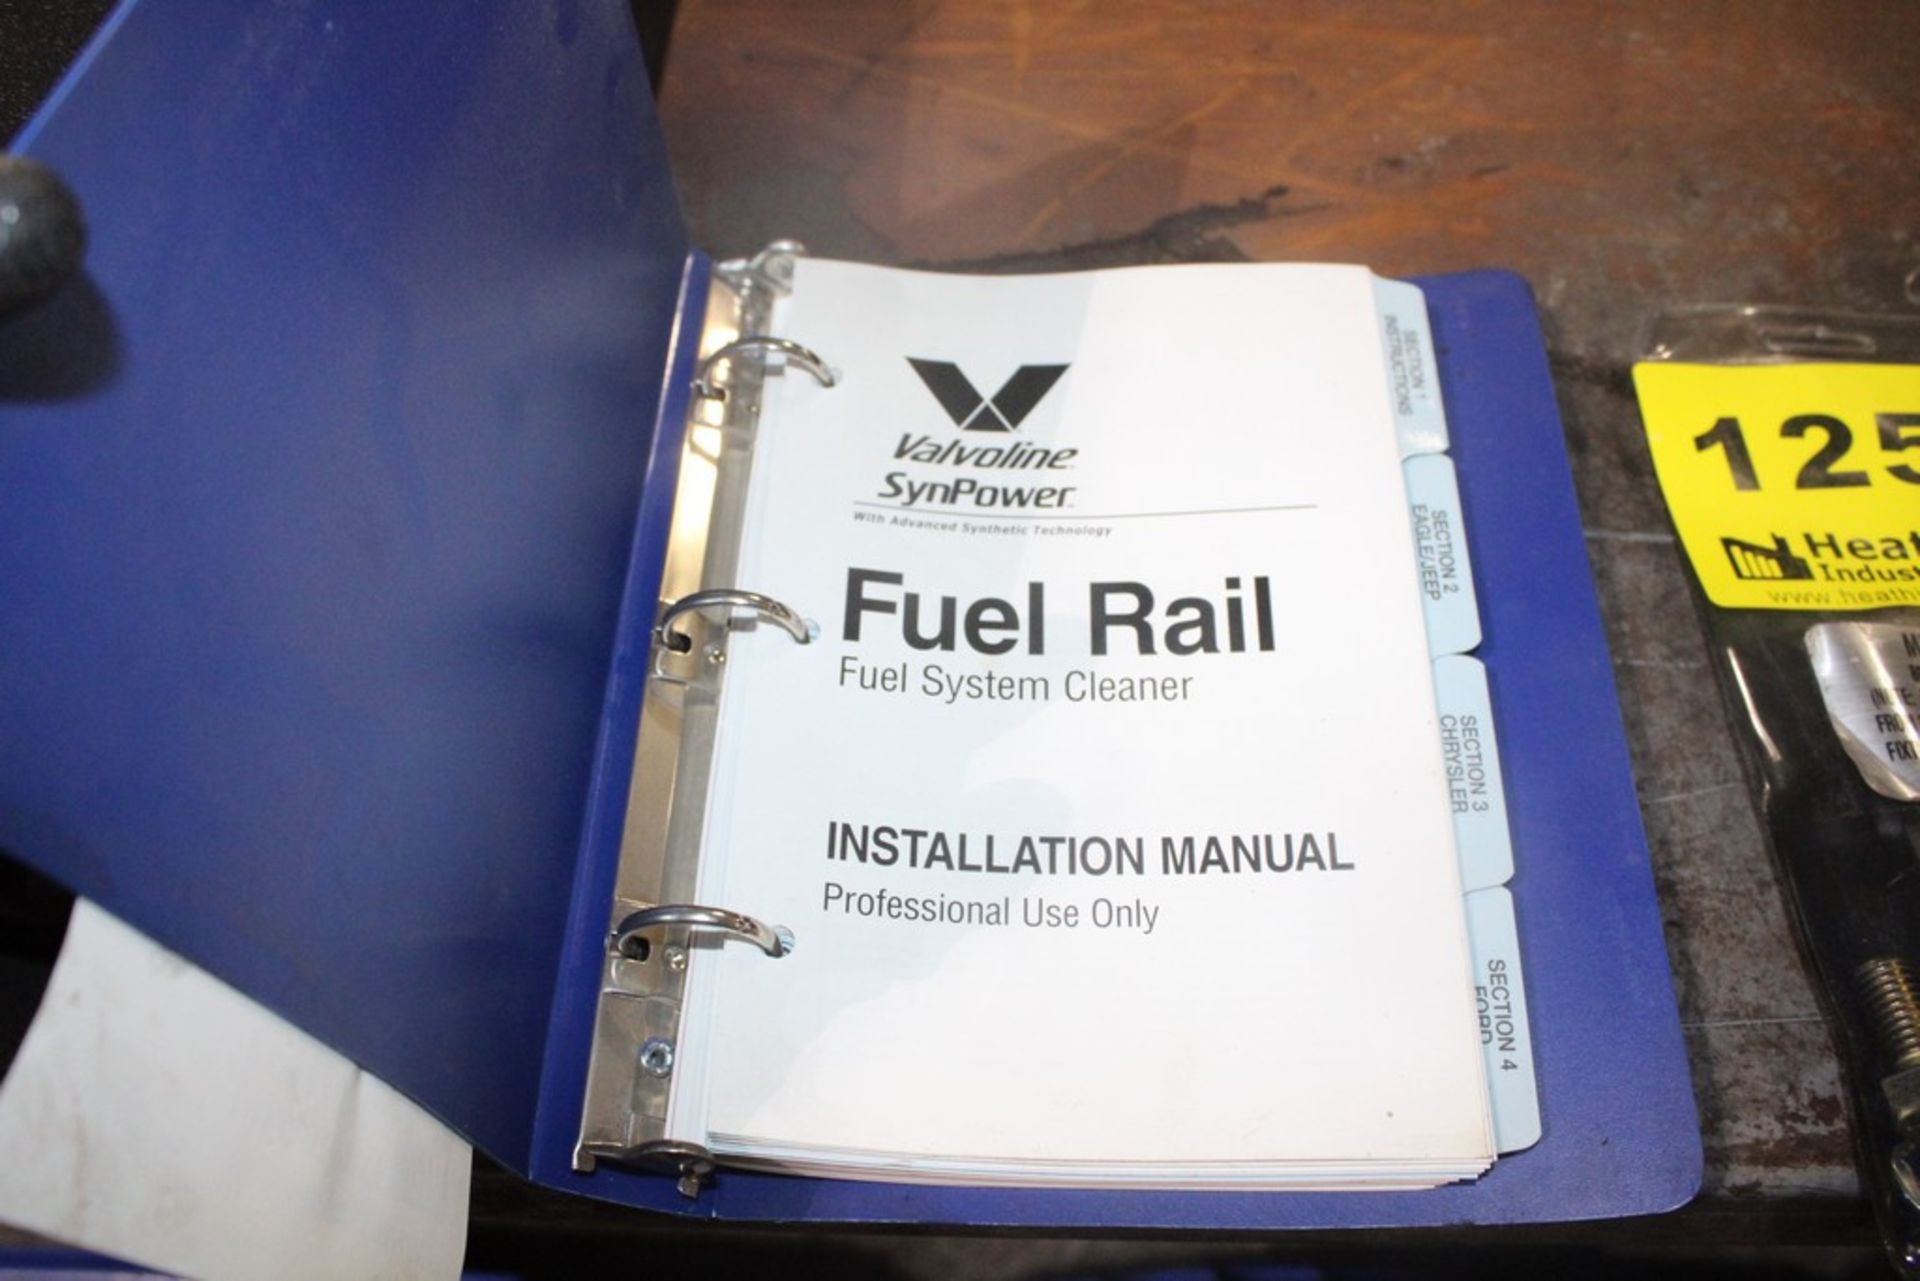 VALVOLINE MODEL SYNPOWER FUEL RAIL FUEL SYSTEM CLEANER INSTALLATION MANUAL - Image 2 of 2